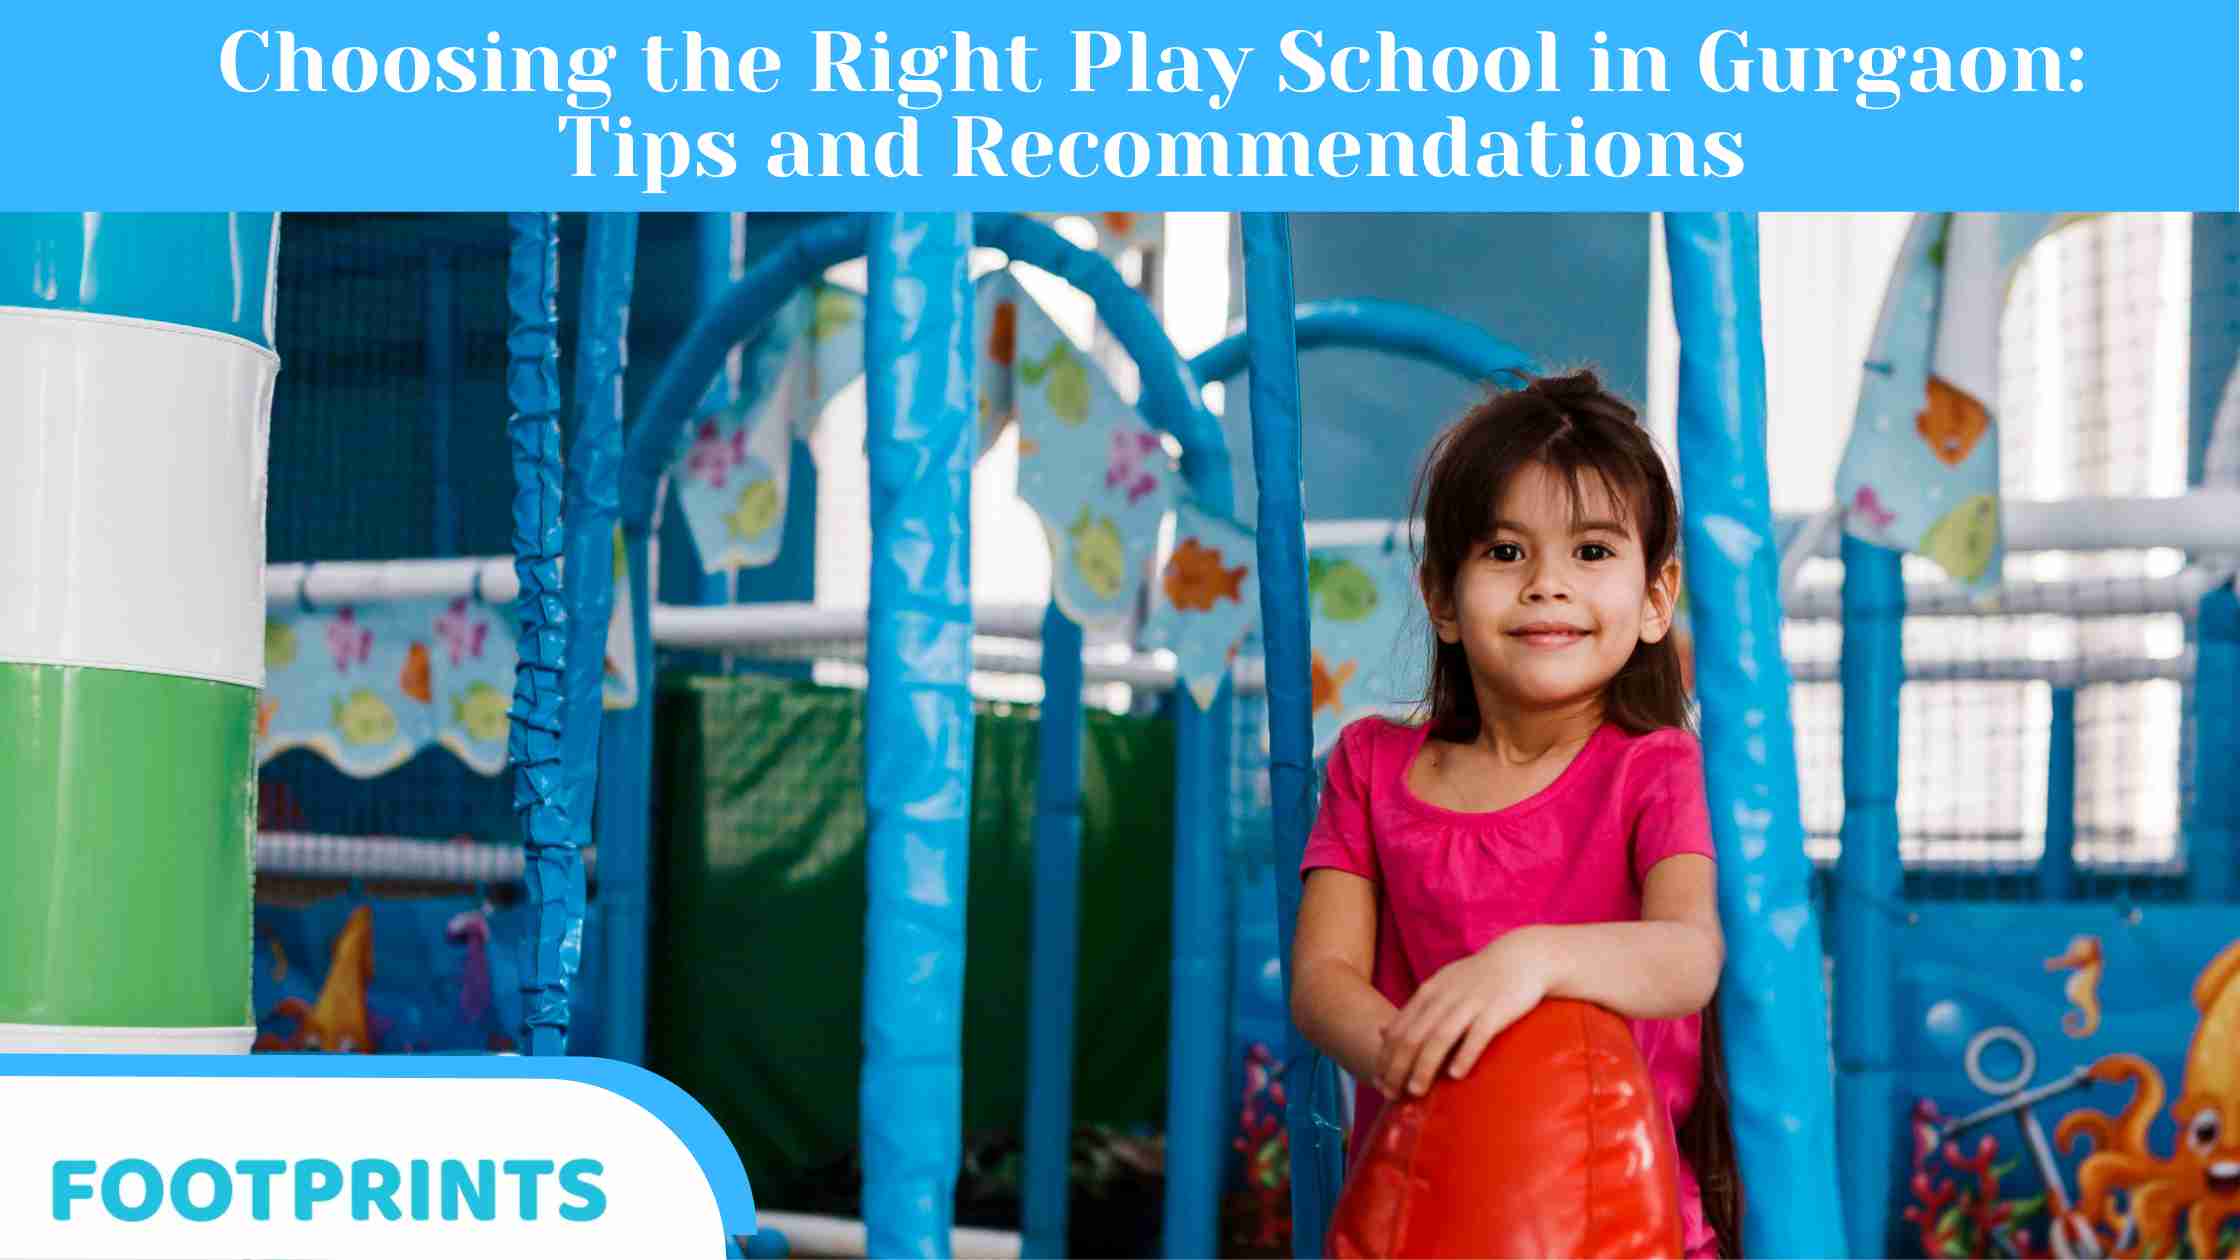 Choosing the Right Play School in Gurgaon Tips and Recommendations_11zon